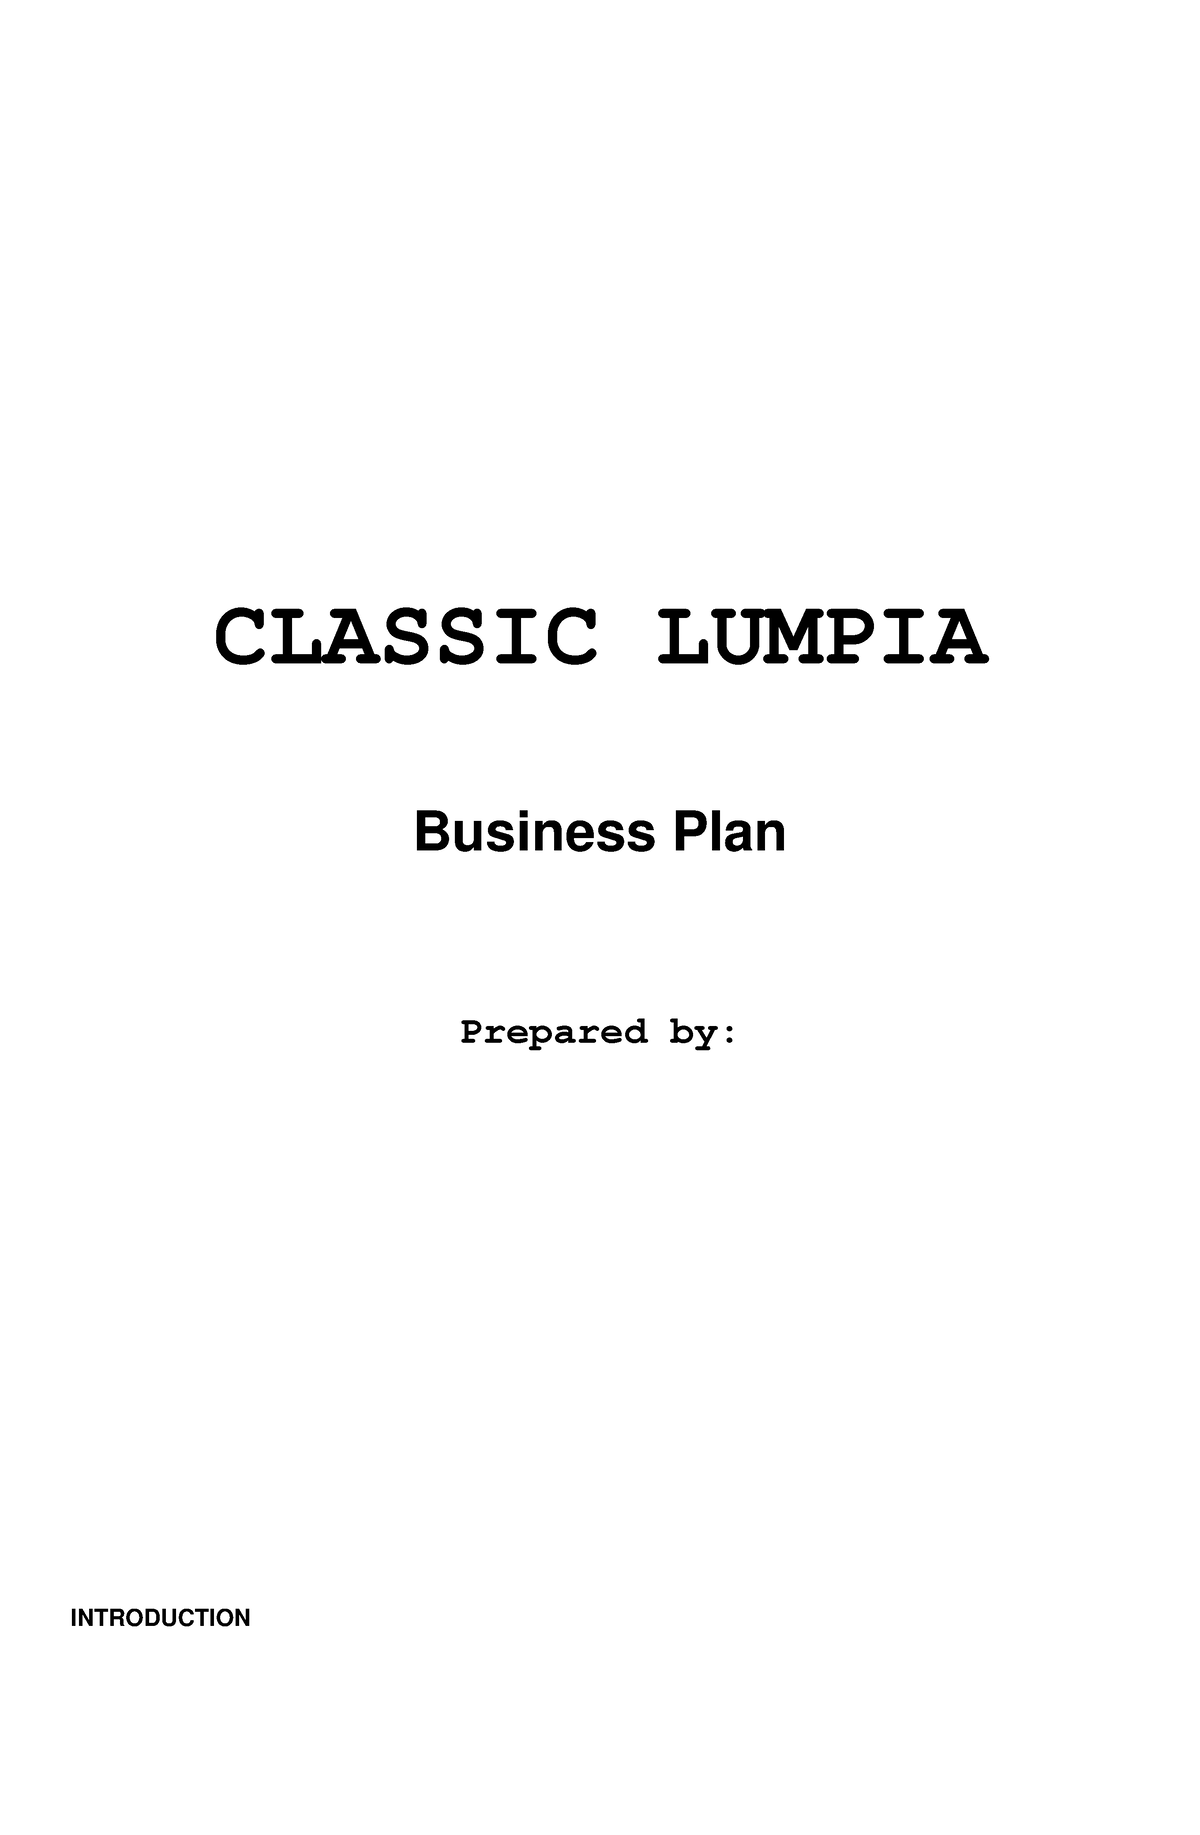 business plan sample for lumpia